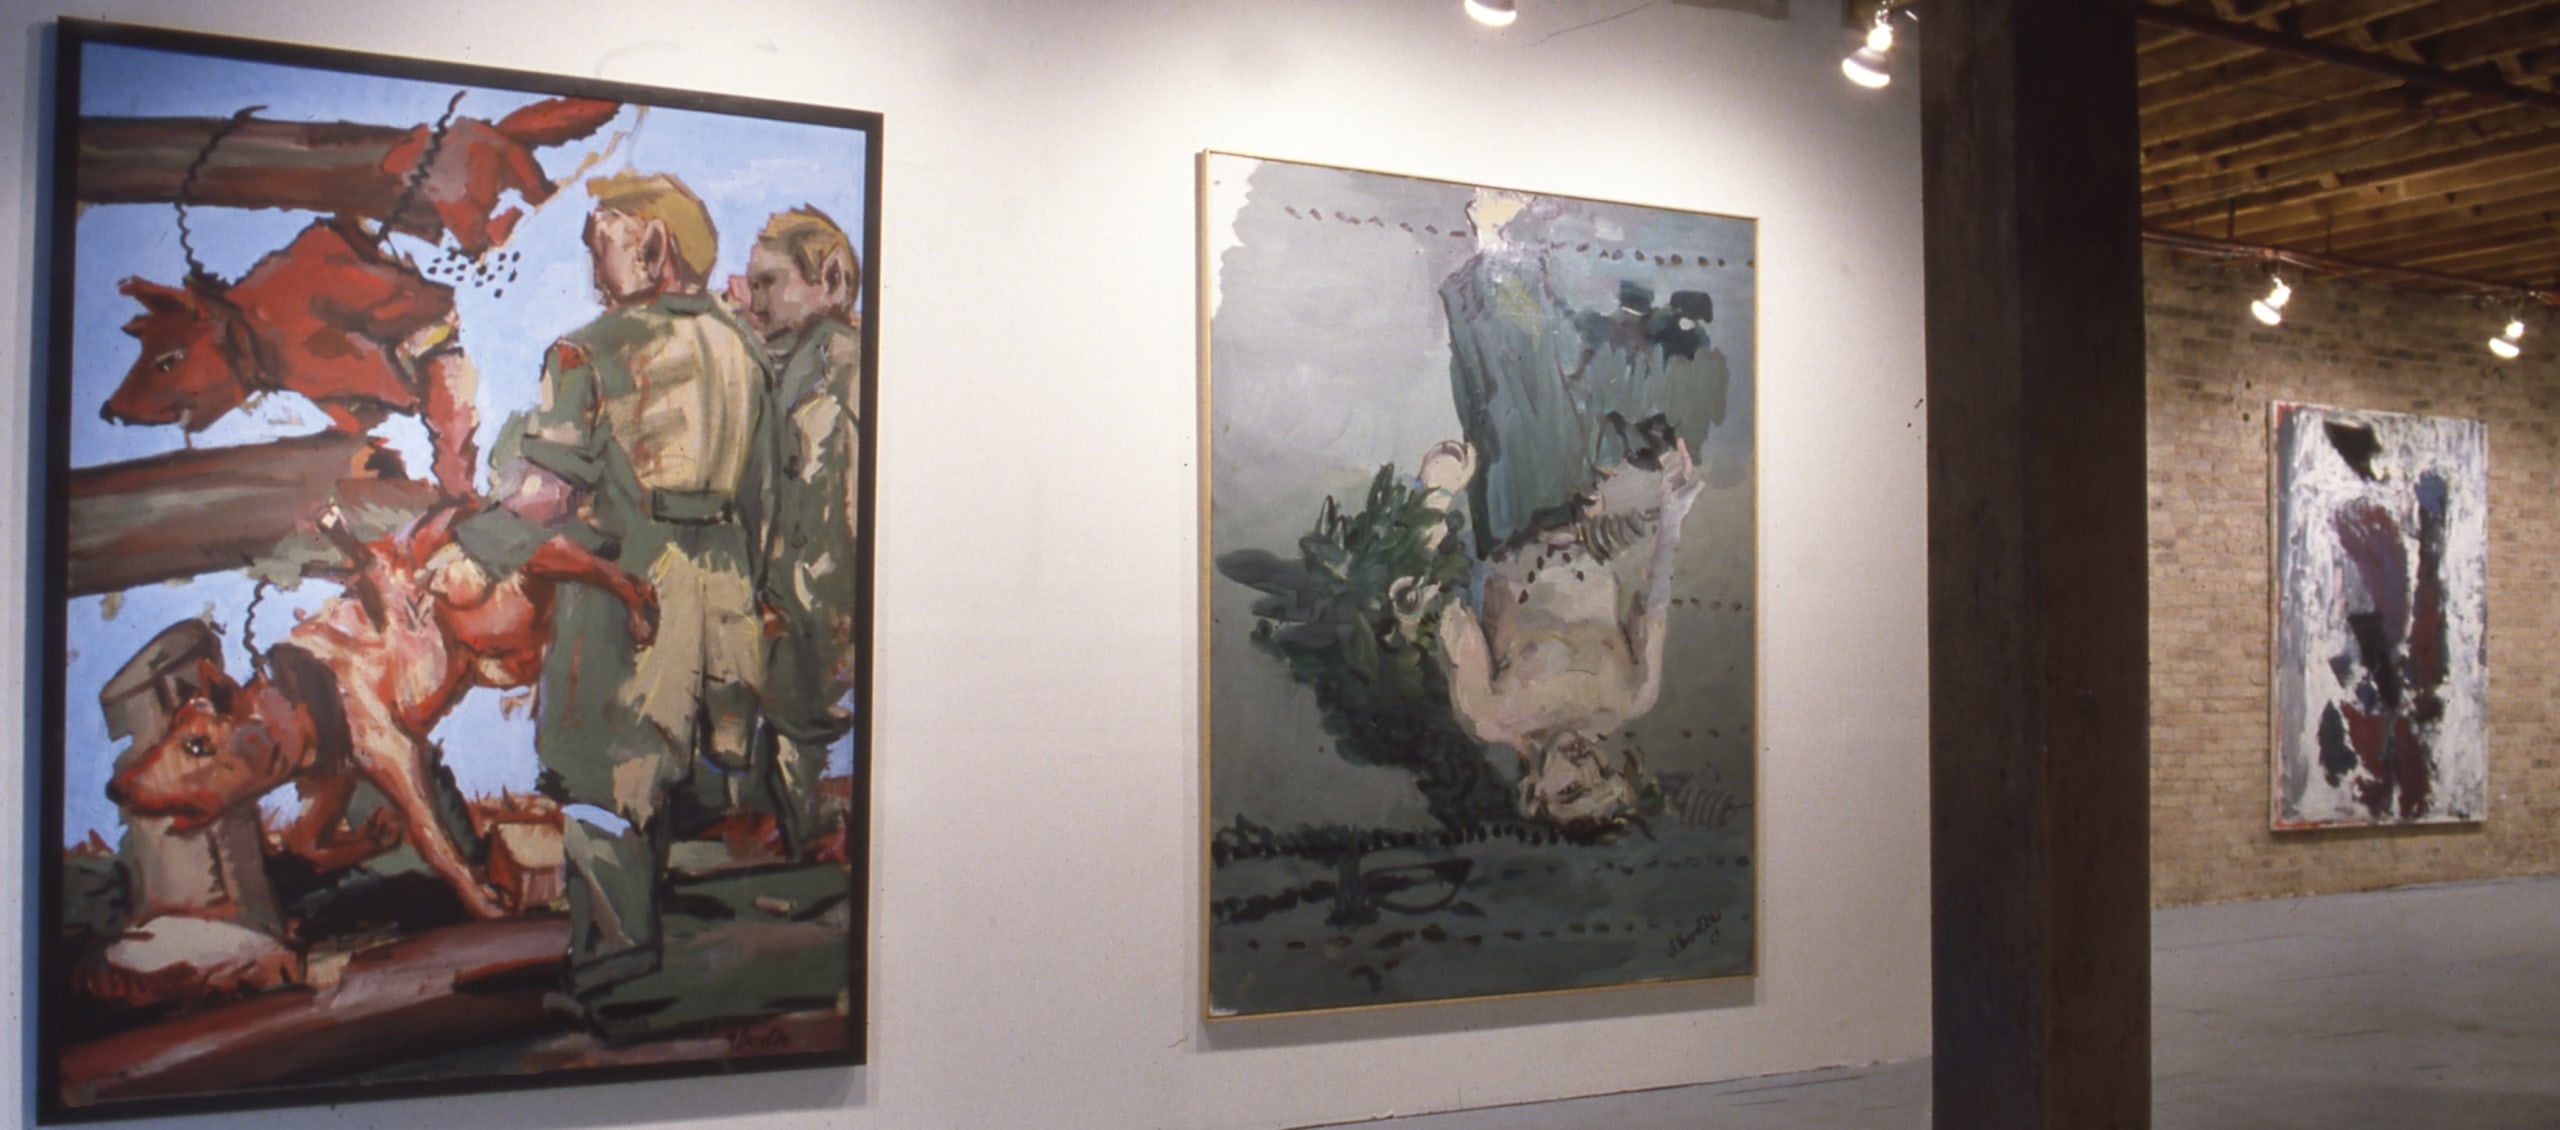 Installation view at Young Hoffman Gallery, Georg Baselitz, Paintings 1968 – 82, 1982